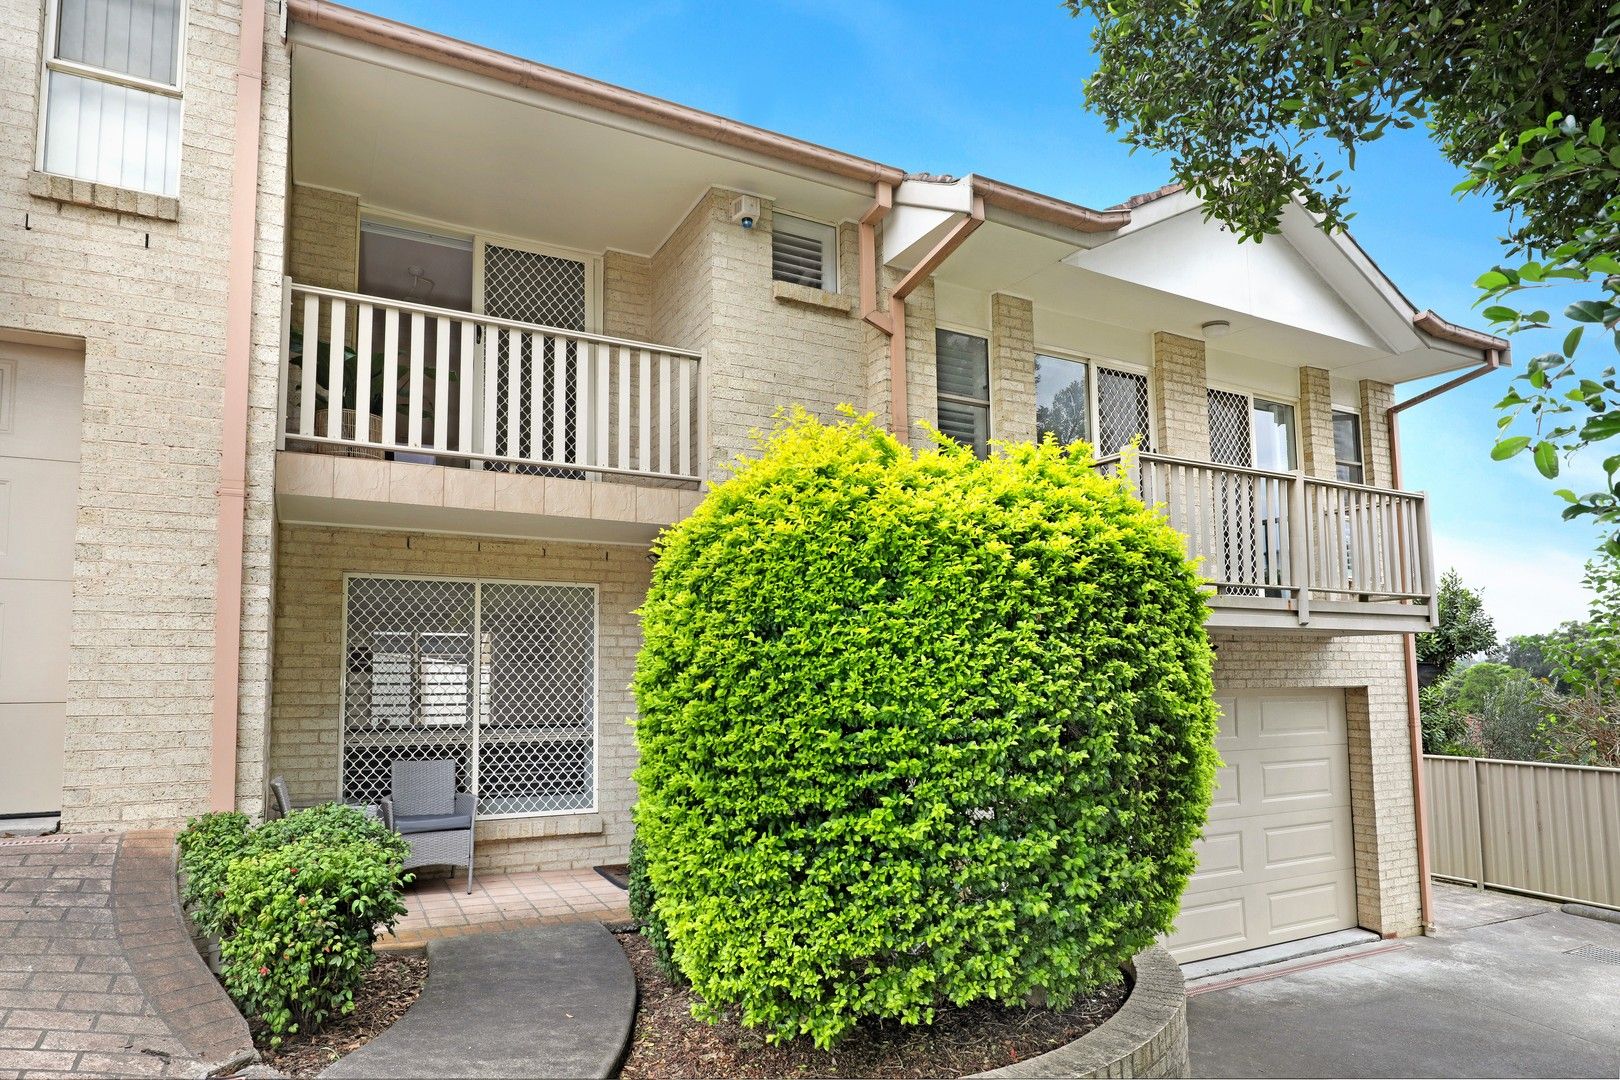 4/29 Hillcrest Street, Wollongong NSW 2500, Image 0